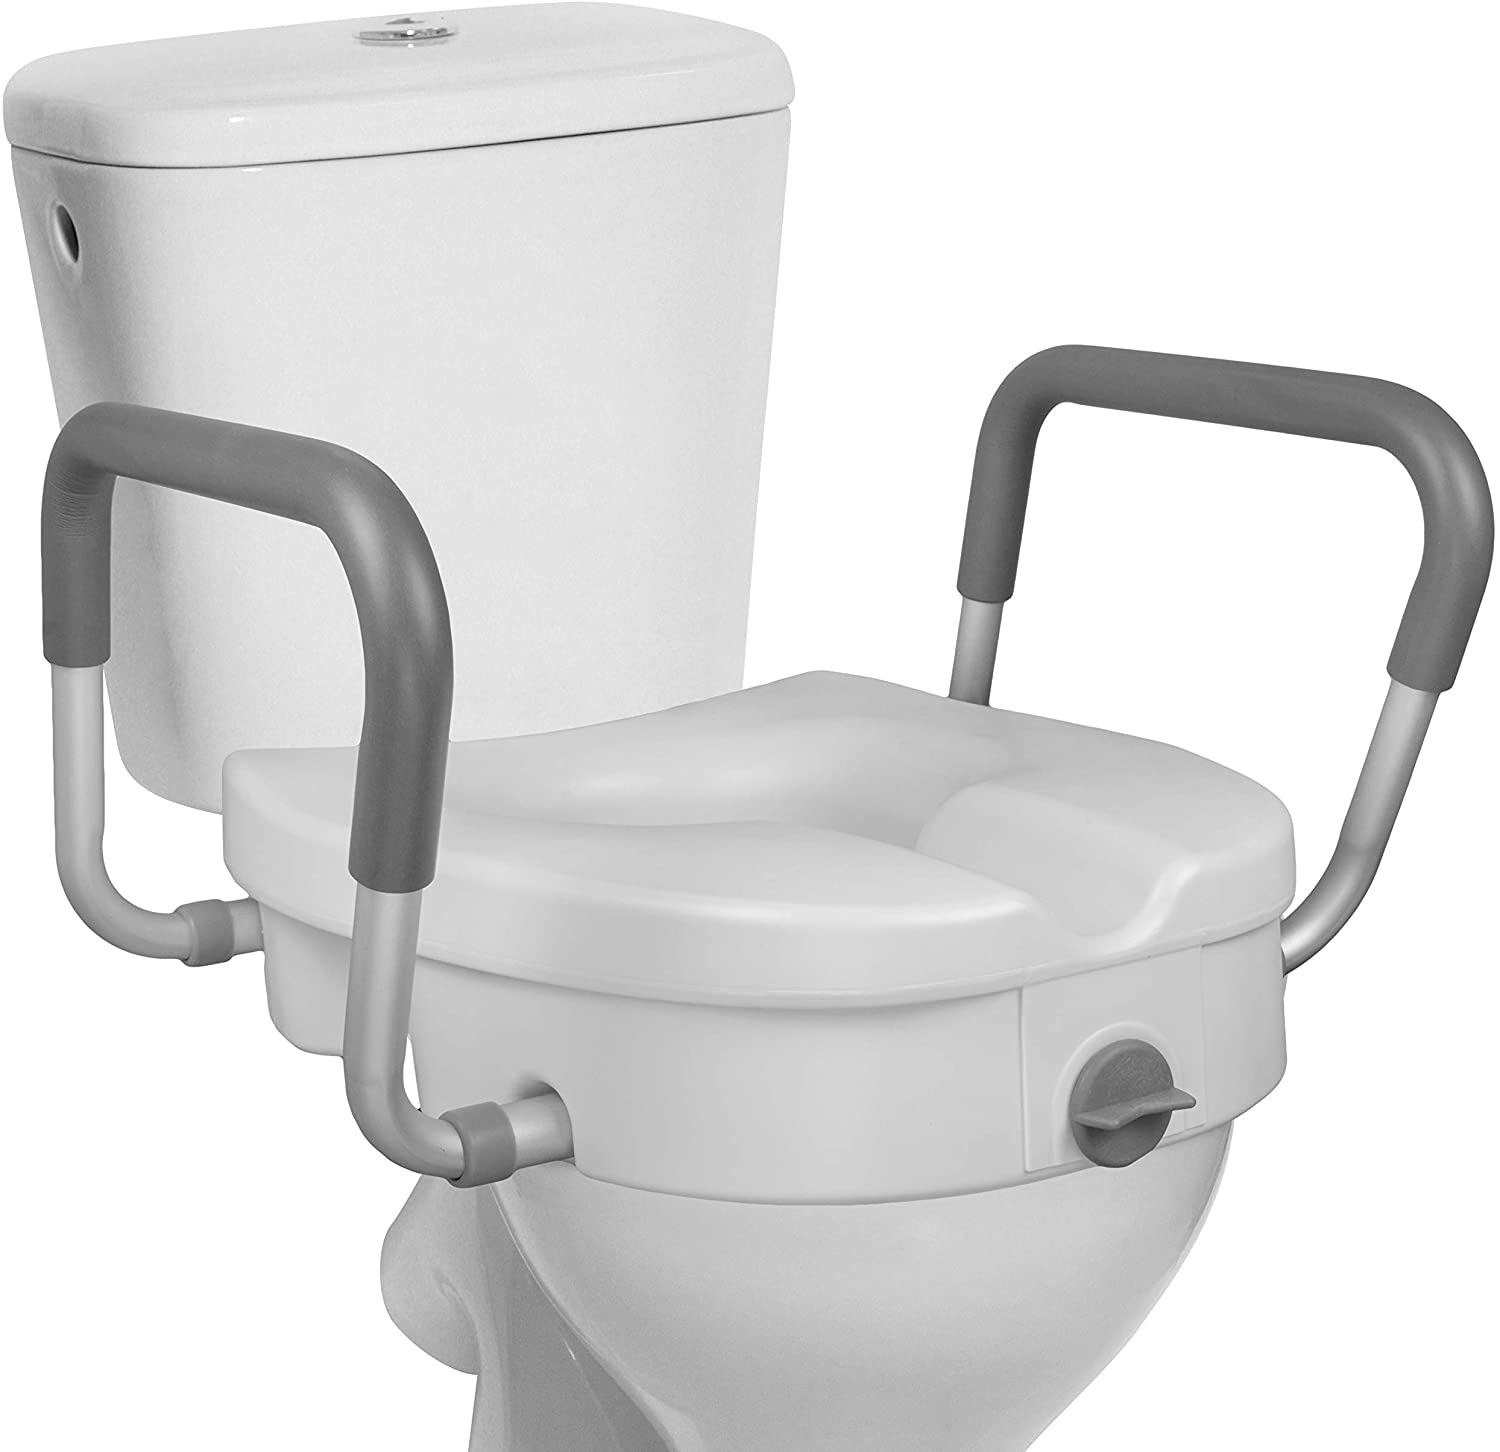 Rms Raised Toilet Seat - 5 Inch Elevated Riser With Adjustable Padded Arms - Toi